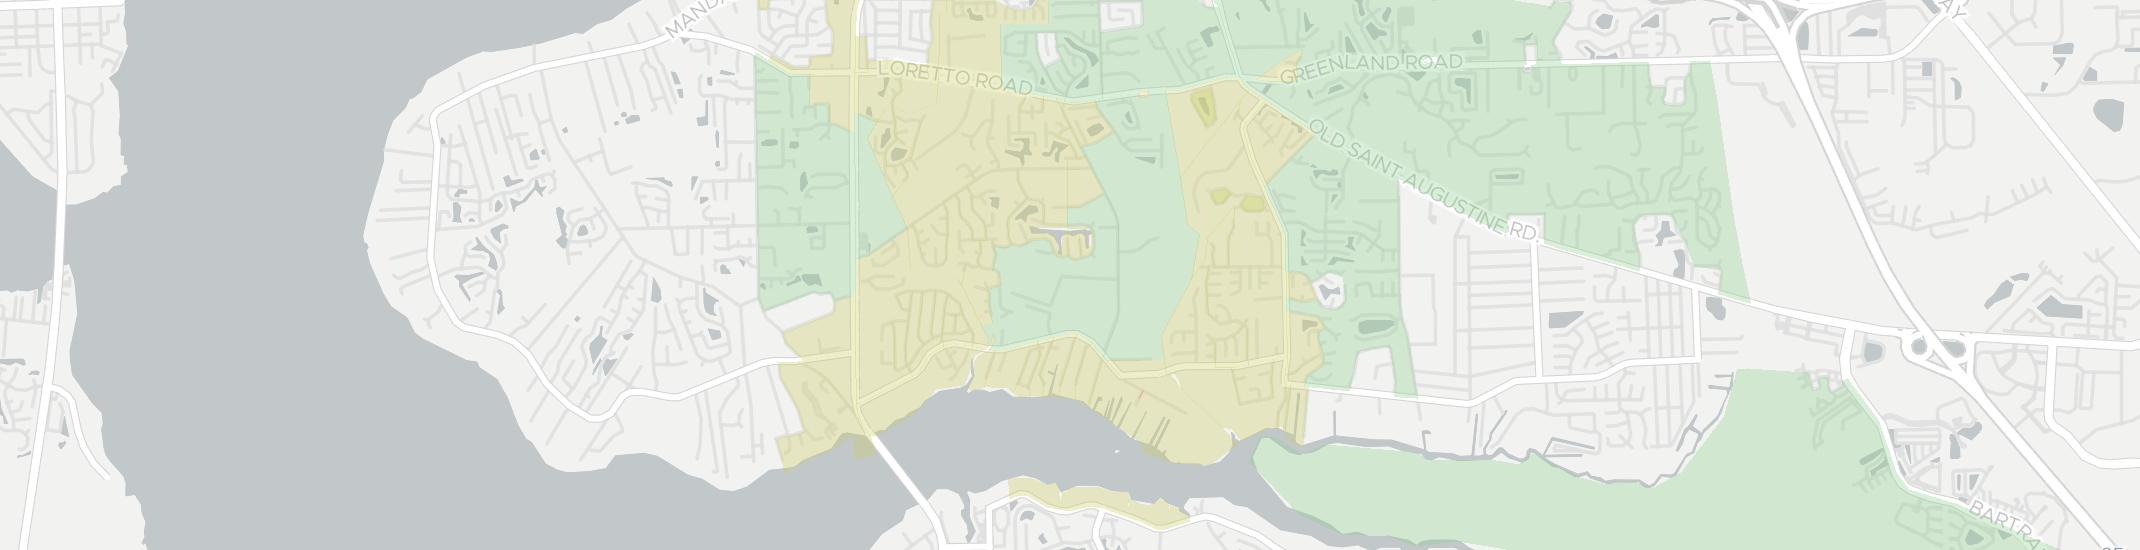 Julington Creek Internet Competition Map. Click for interactive map.